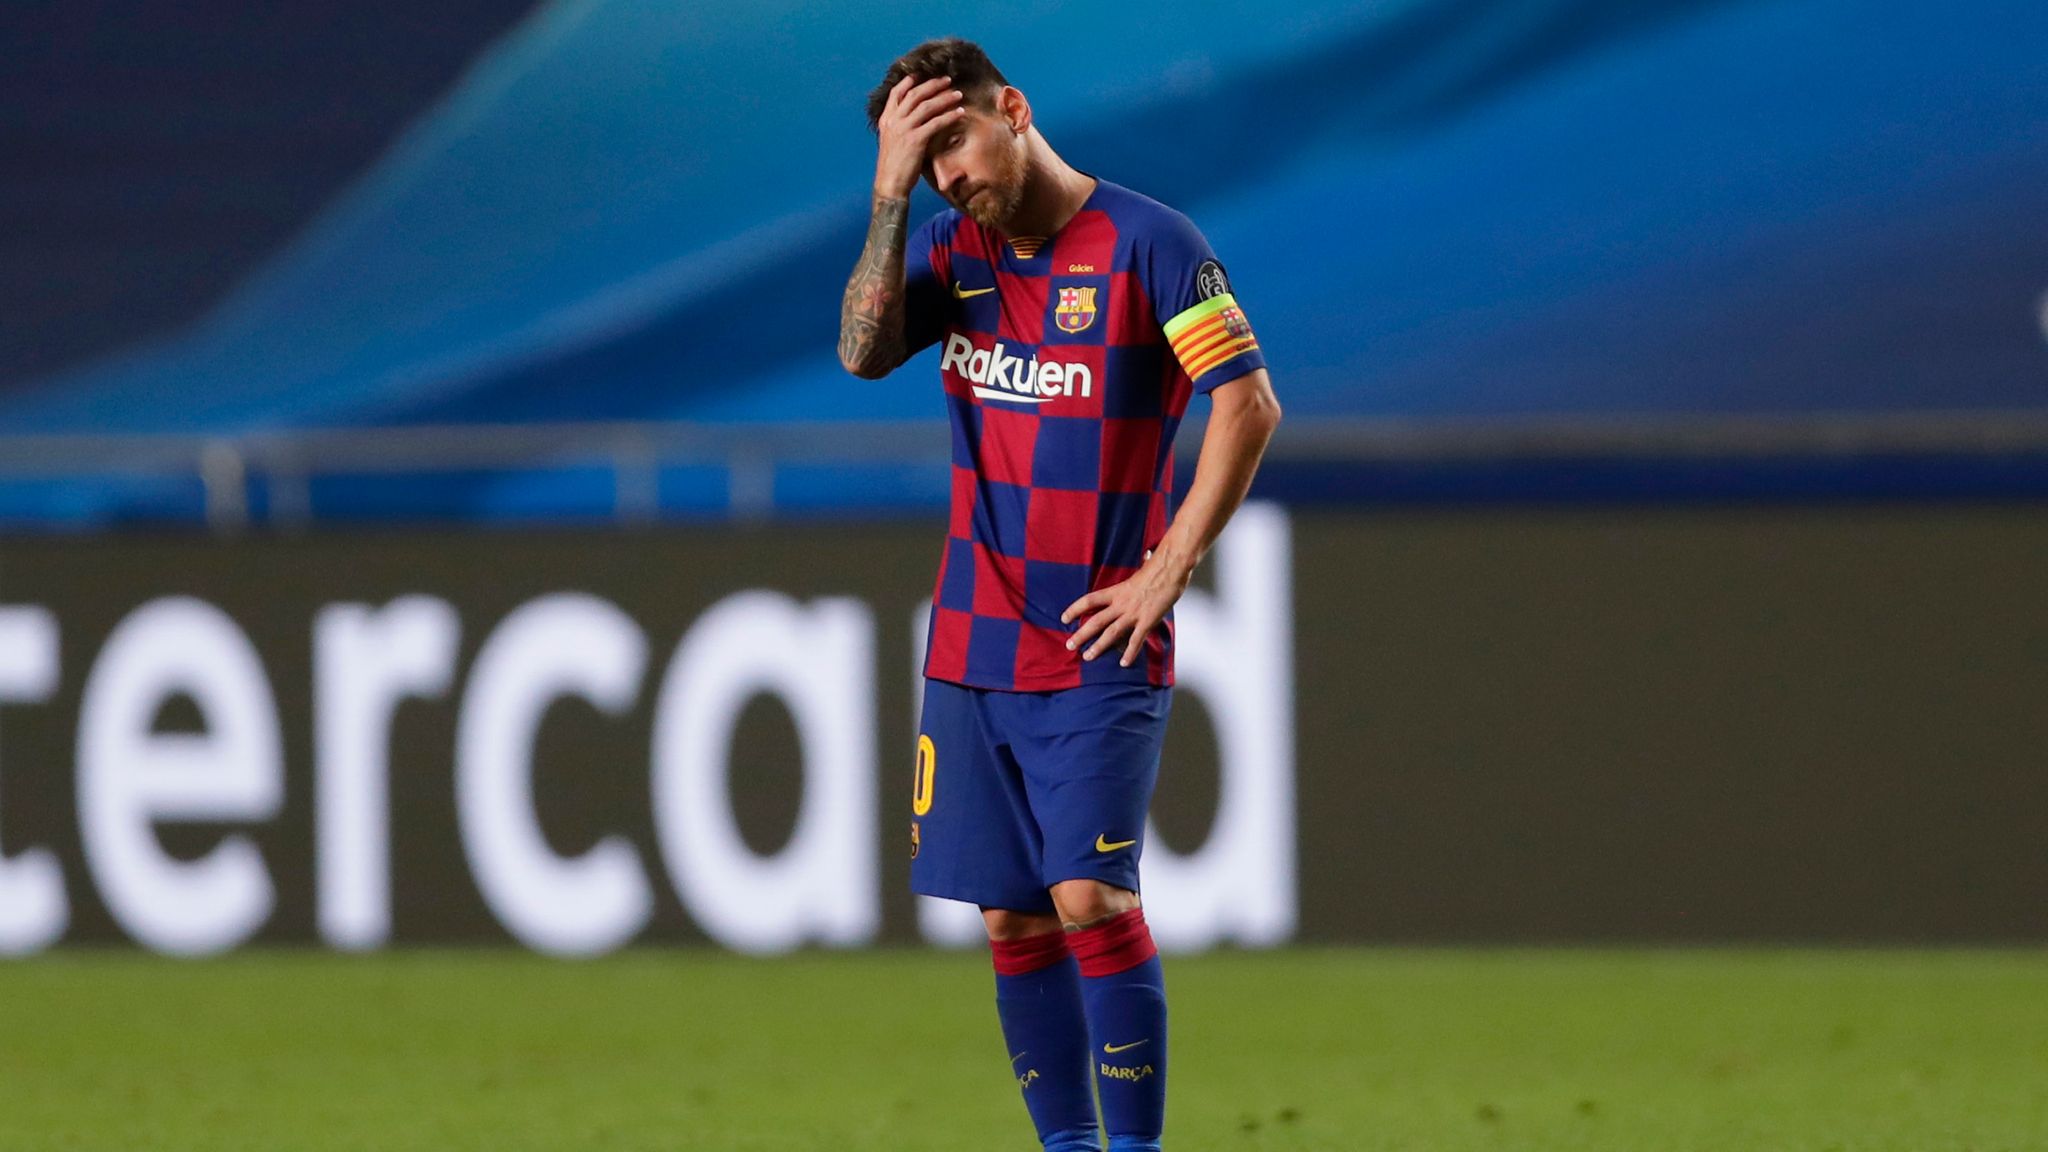 Lionel Messi has requested release from Barcelona, 10 days after they lost 8-2 in Champions League final